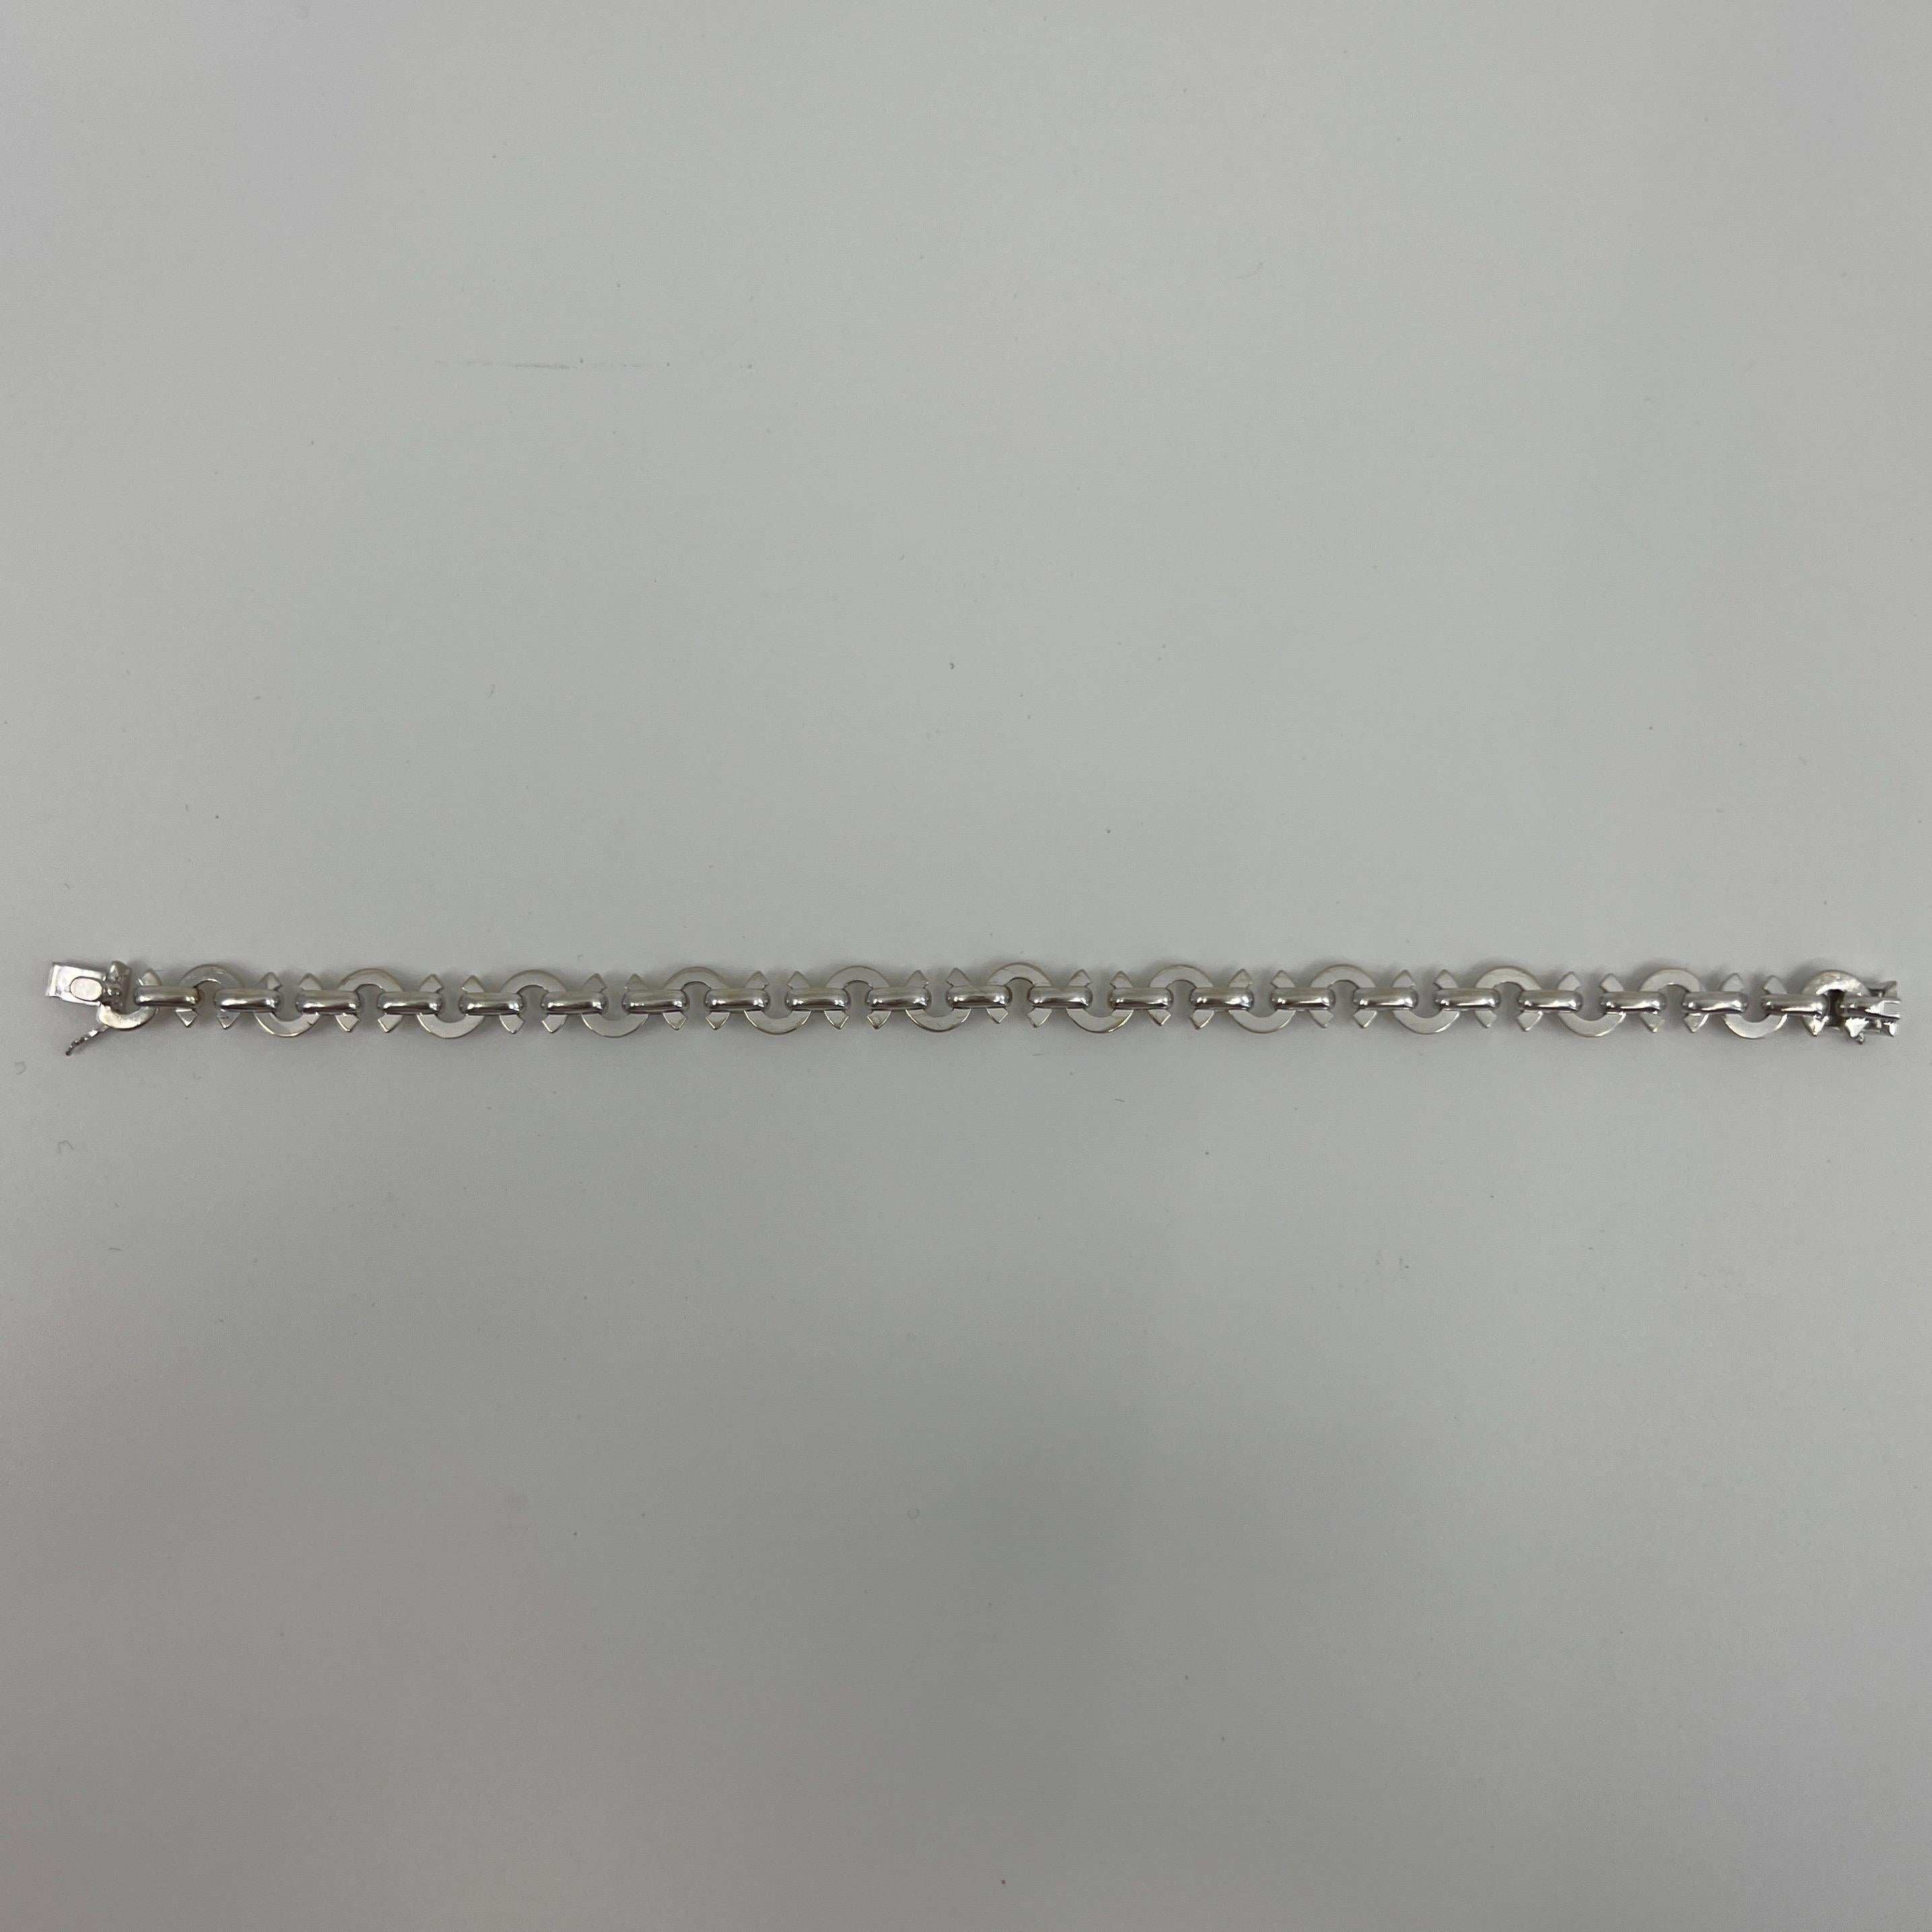 Chanel C Link Charm 18k White Gold Bracelet.

Rare limited edition Chanel C link 18k white gold bracelet with original box. 
Beautiful interlocking 'C' links.
Bracelet measures 20cm - 8 inches. 
Weighs 23.29g.

A larger size on bracelets like this